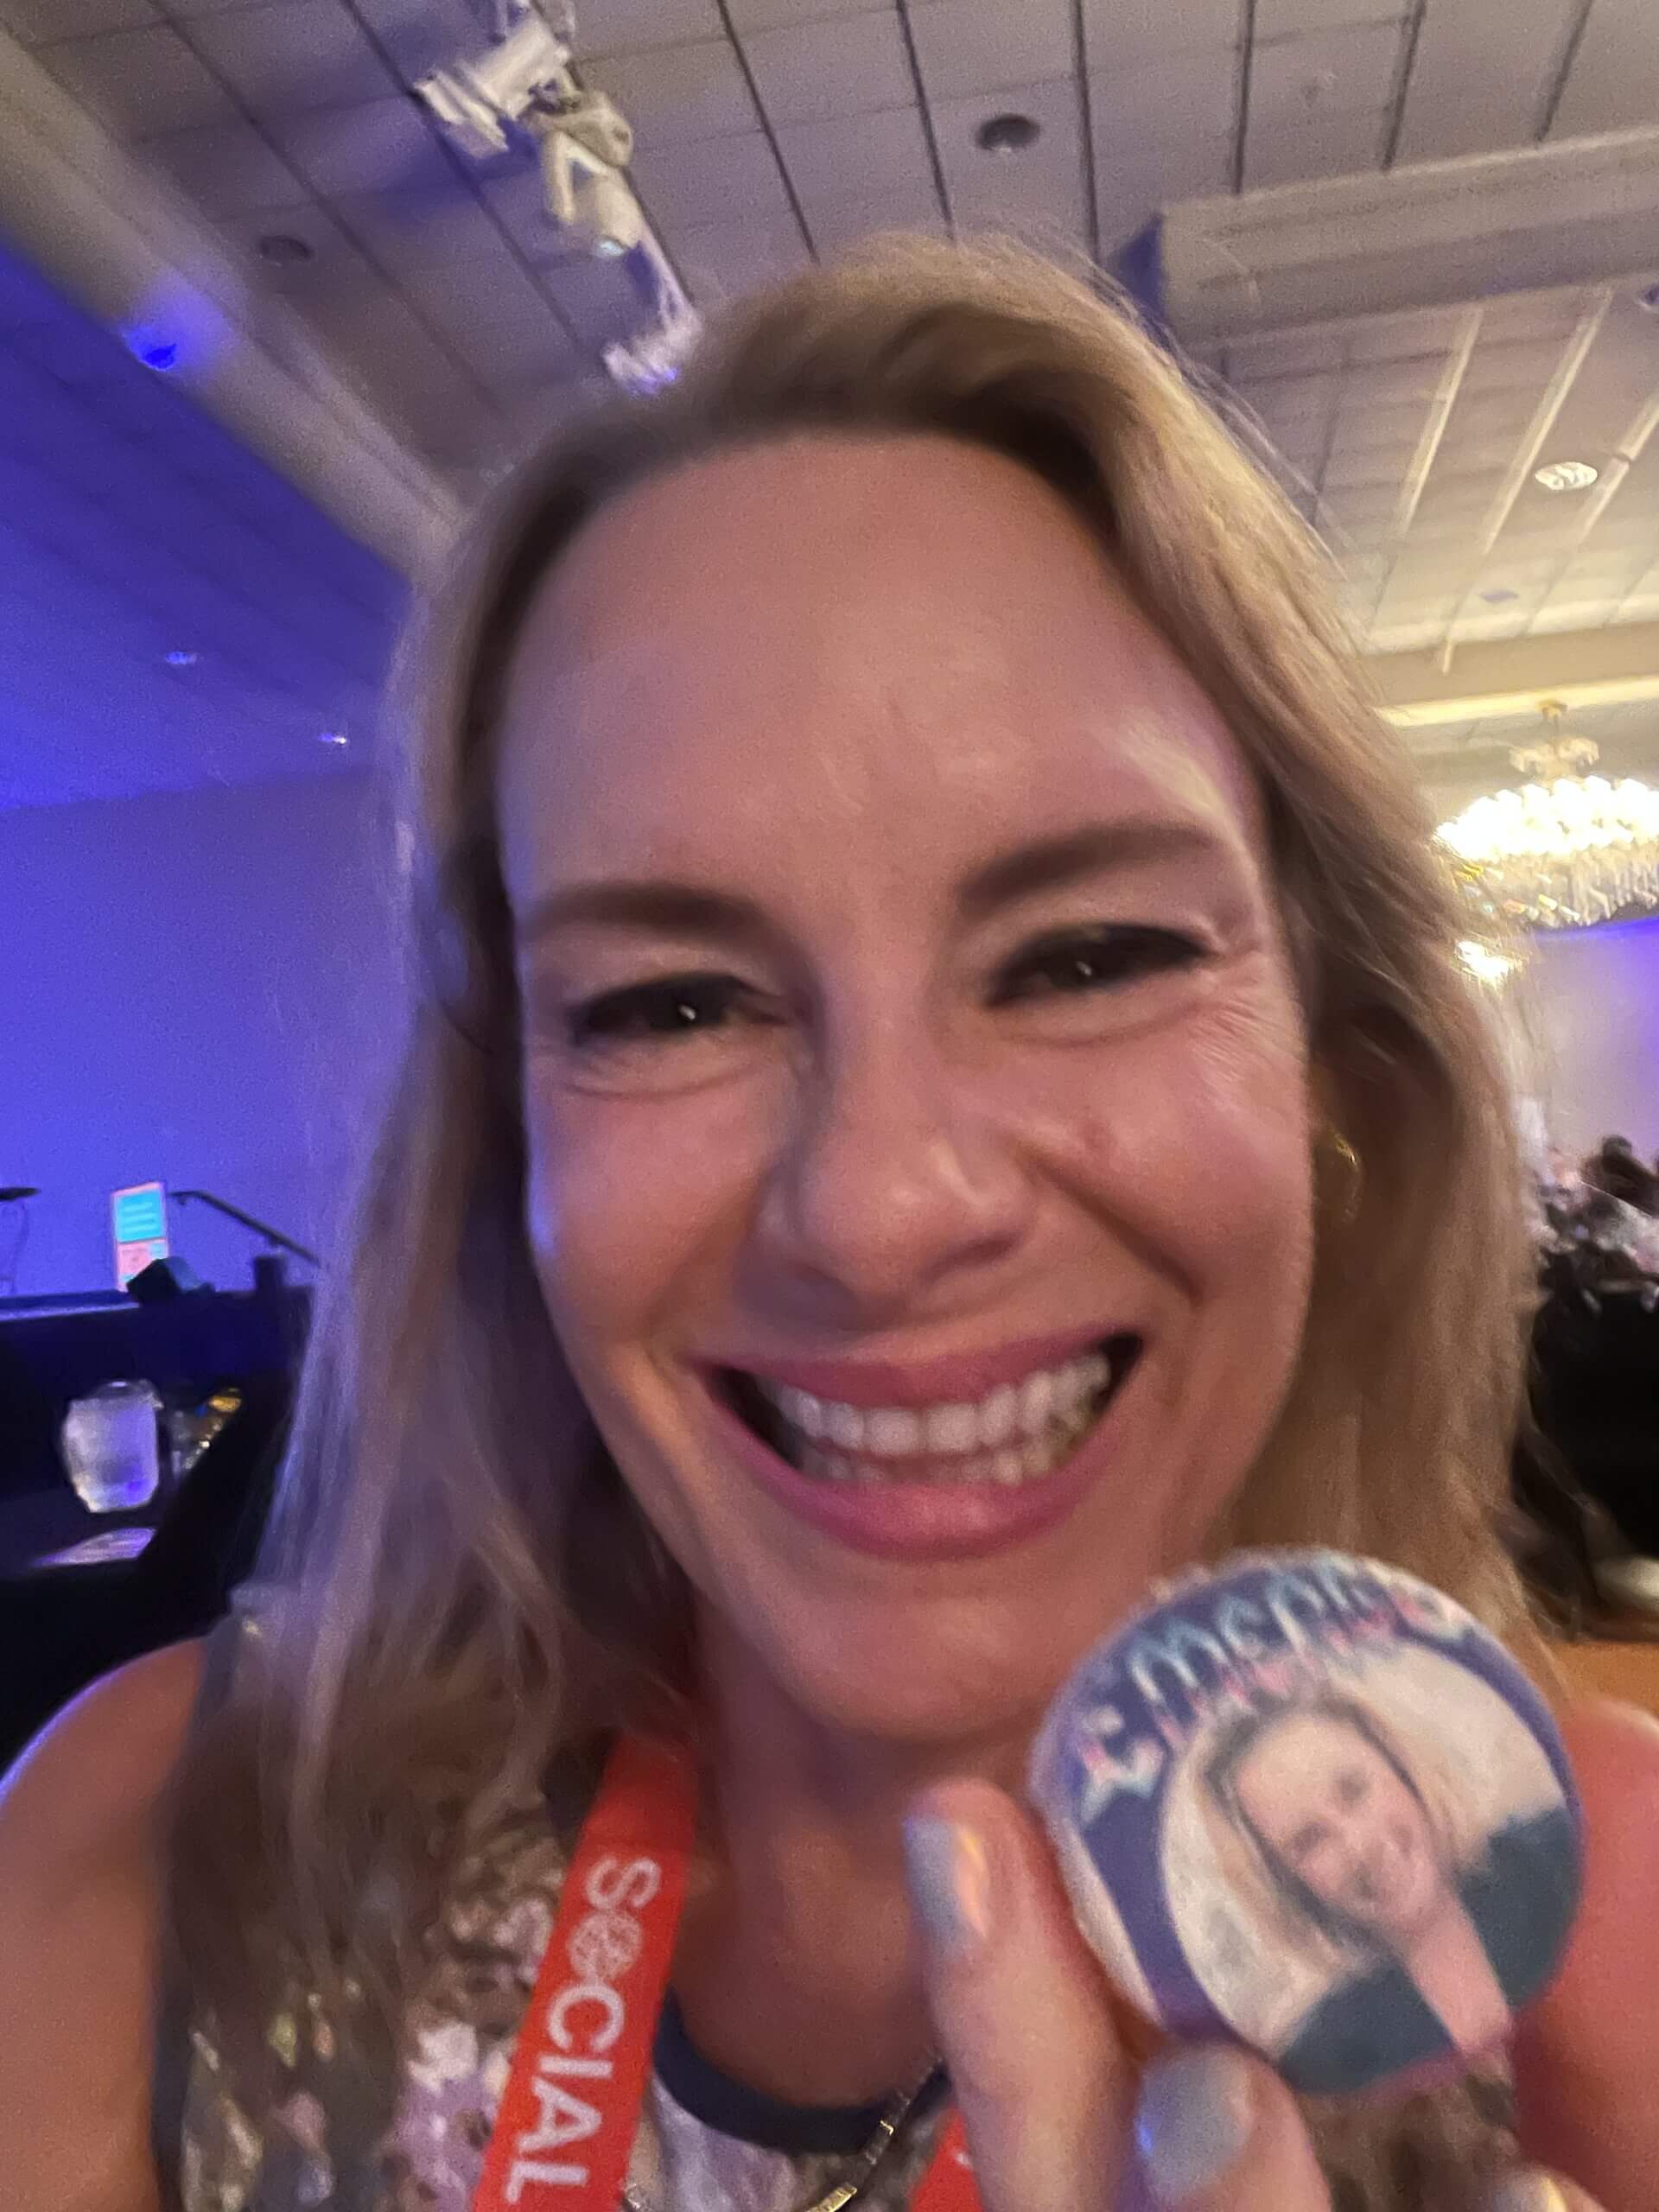 Woman smiling viveka von rosen with a cookie personalized with her face on it